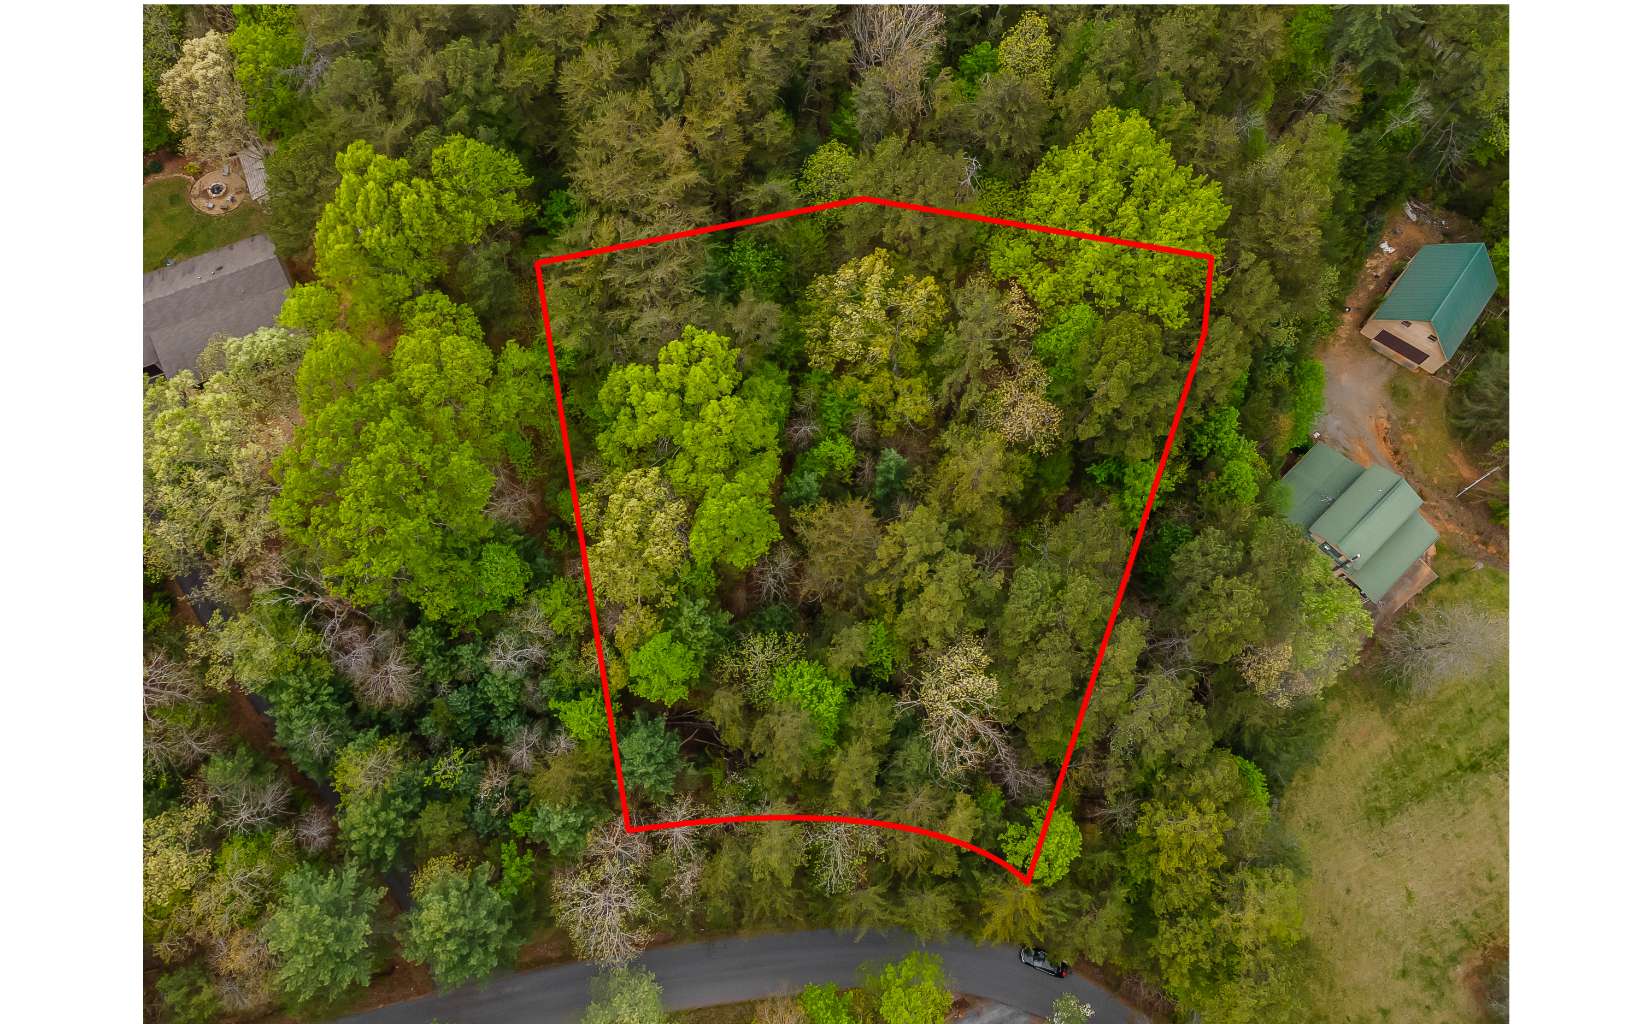 Looking for a beautiful lot to build your dream home or cabin in Blue Ridge with no HOA fees? Check out this gentle building lot in Laurel Crossing on Fightingtown, a quiet and established development, convenient to historic downtown Blue Ridge for shopping and near horseback riding, fishing & boating at Lake Blue Ridge. This beautiful lot is within walking distance to Fightingtown Creek. The soil test and septic permit have been completed and on file.